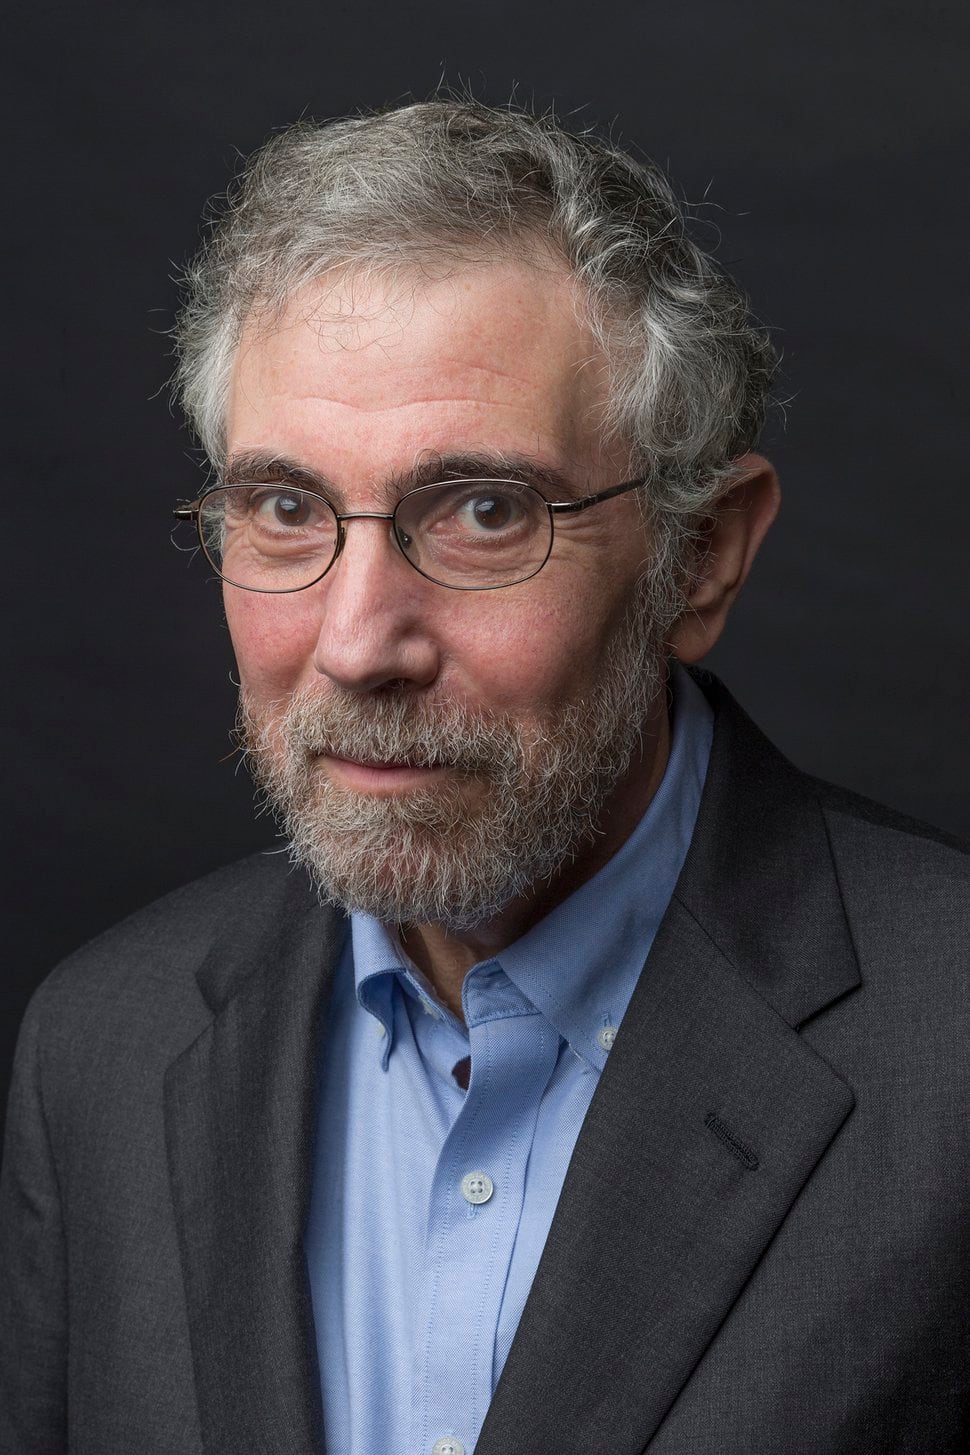 Paul Krugman | The New York Times (CREDIT: Fred R. Conrad)